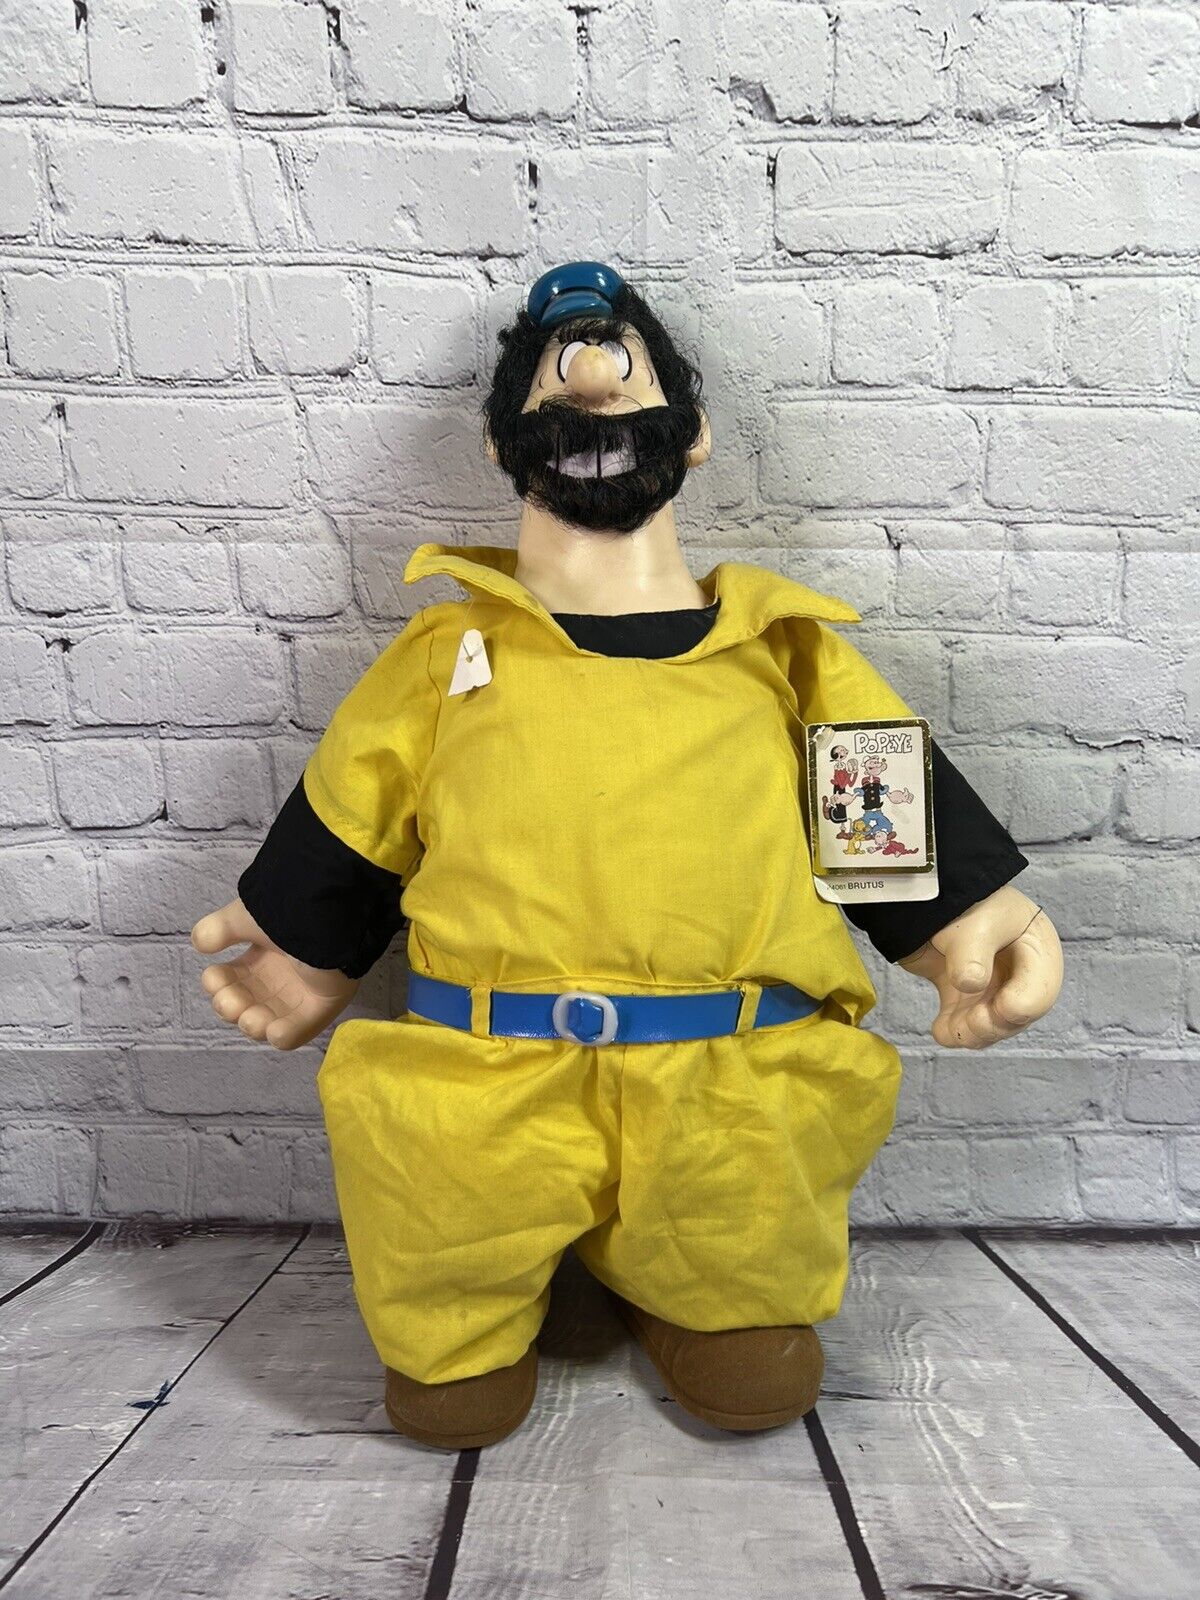 Vintage “Brutus” Plush Doll  From Popeye By Presents 1985 13” With Tag